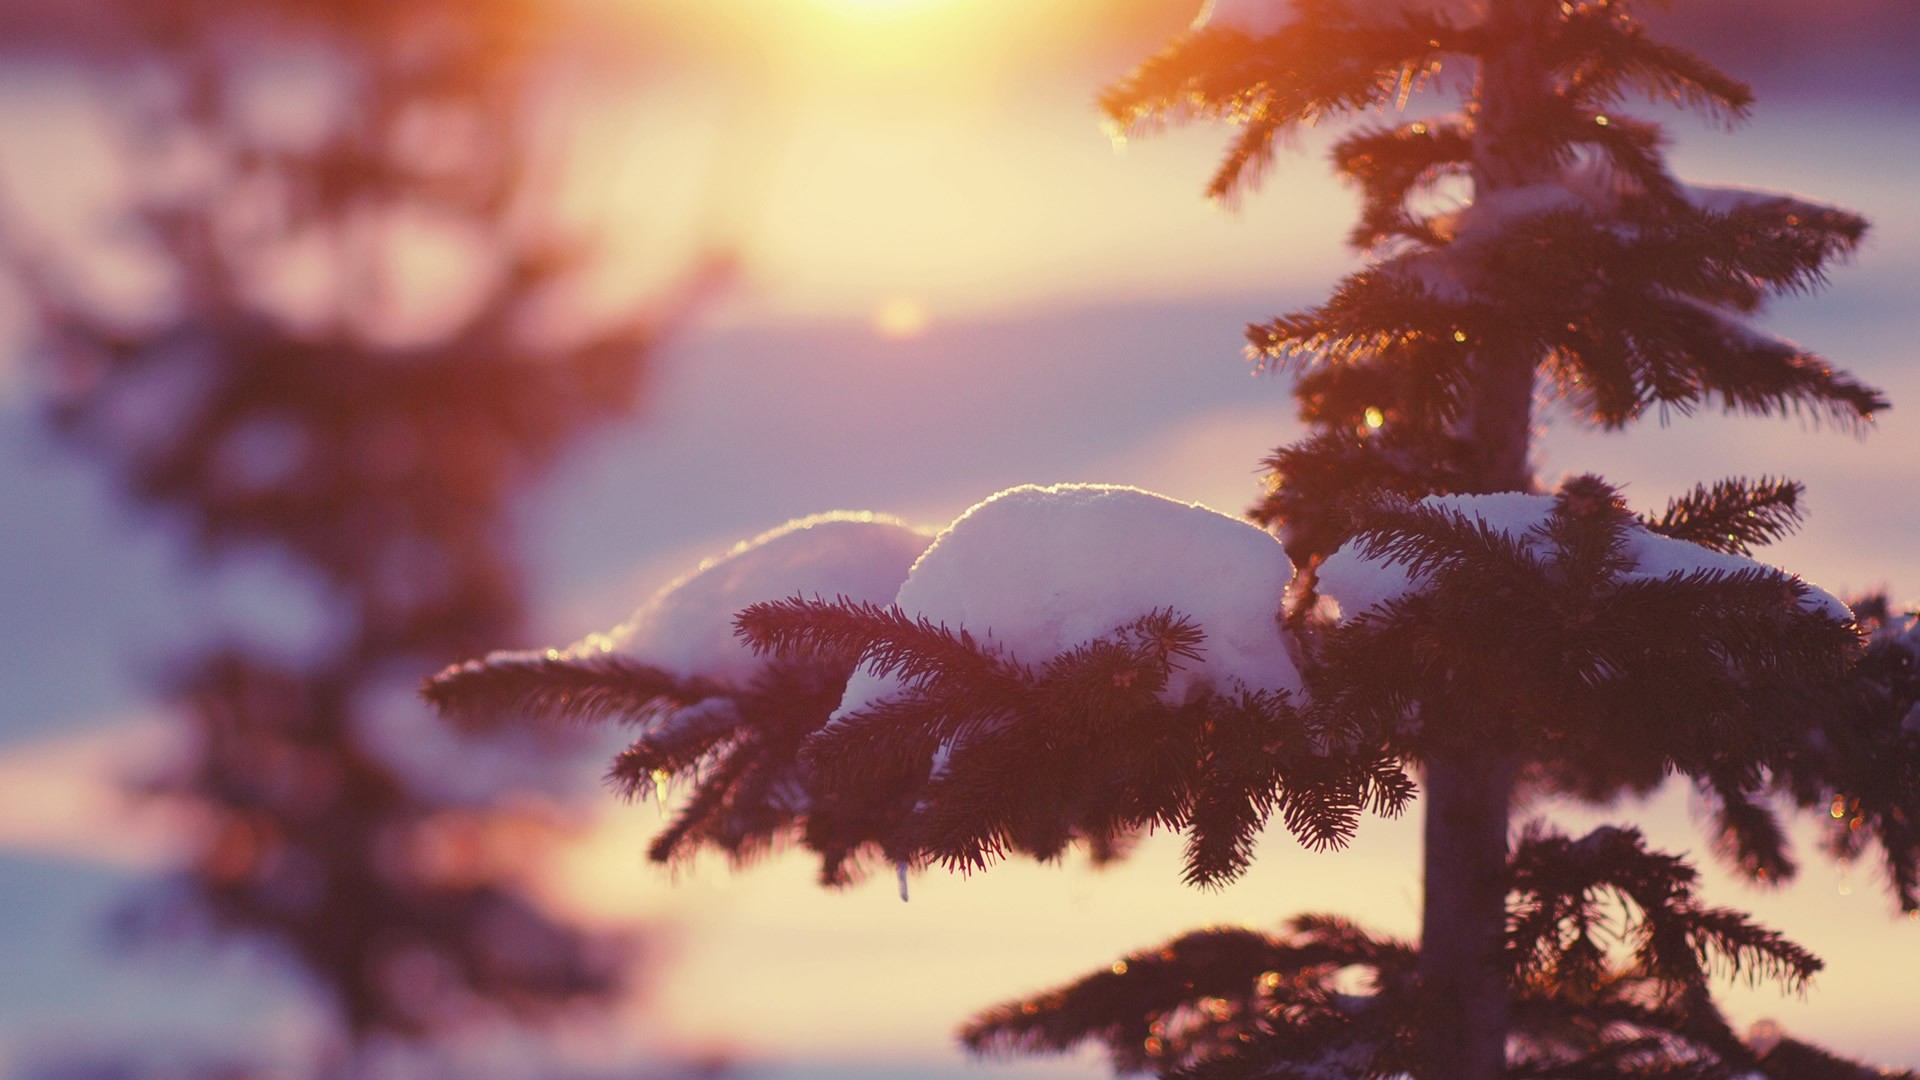 General 1920x1080 snow trees sunlight depth of field winter pine trees nature outdoors cold